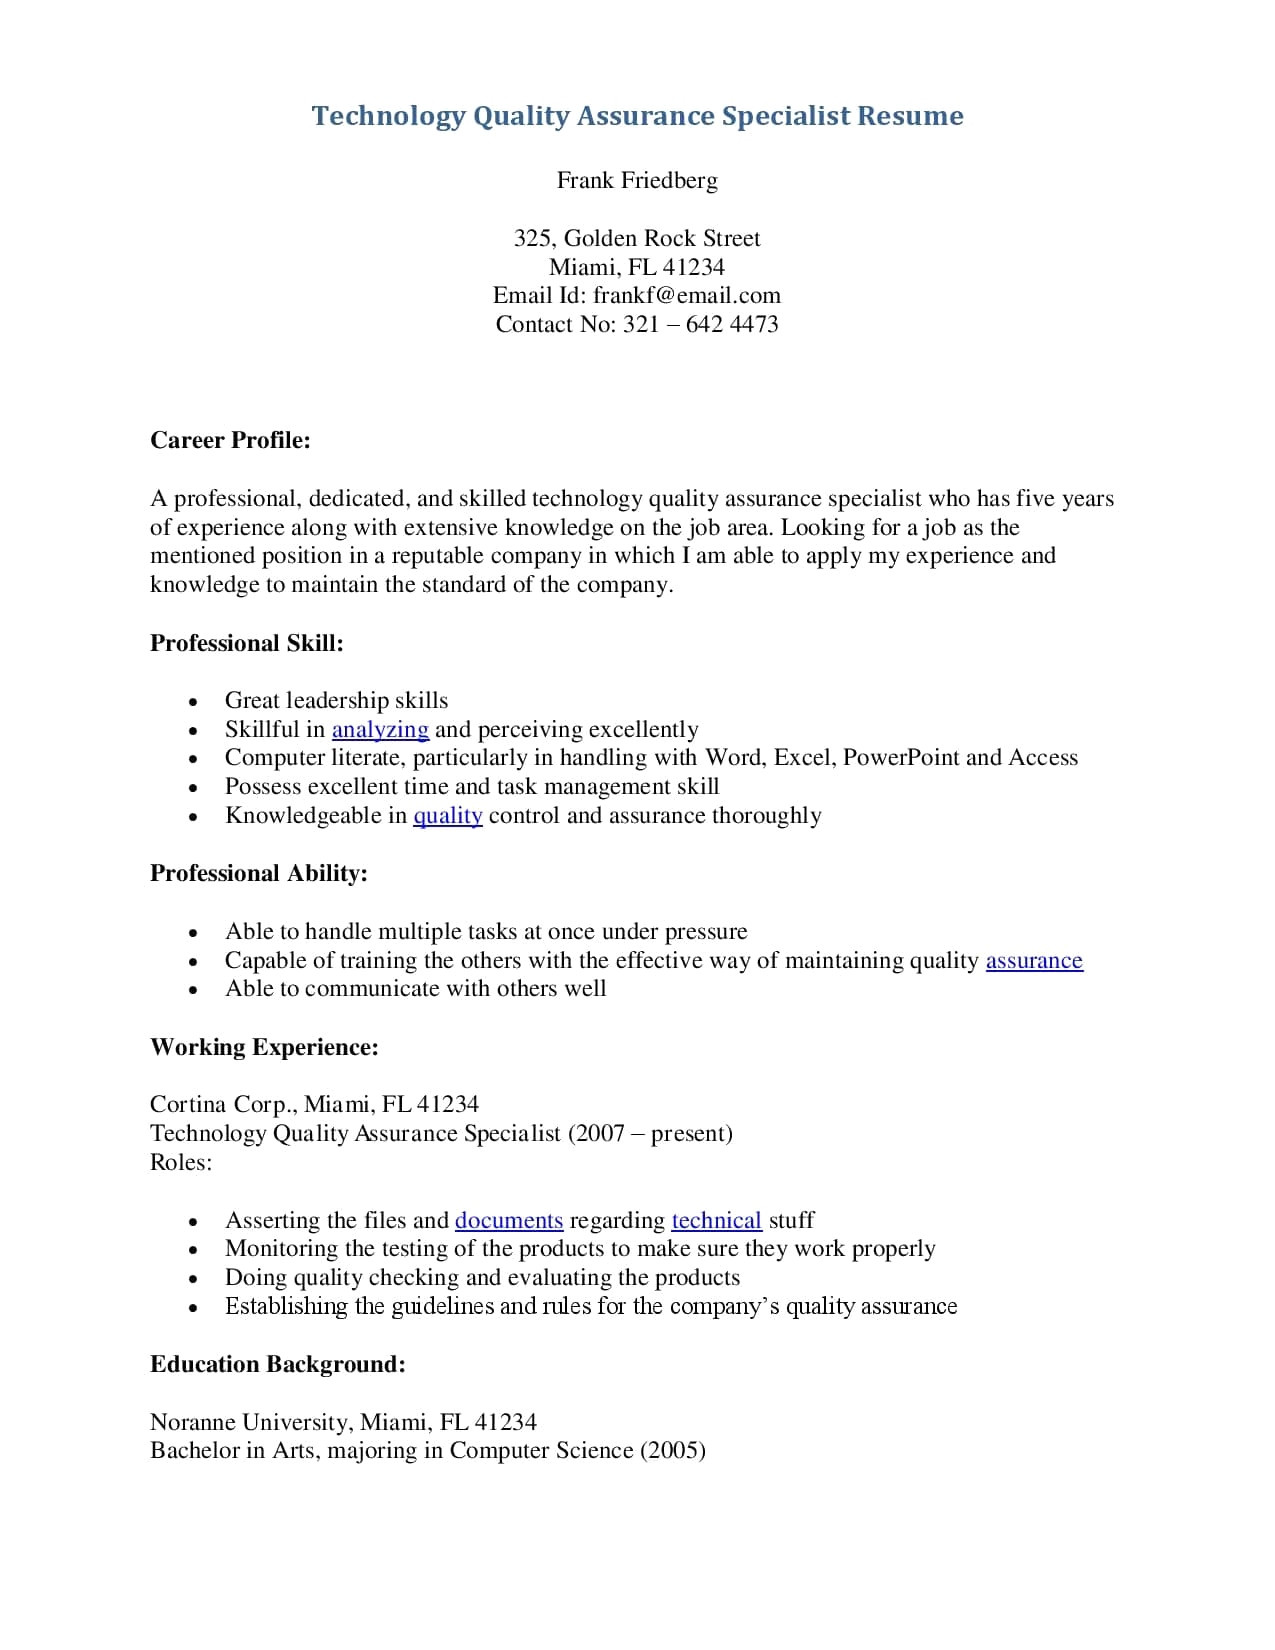 manual testing resume sample for experience